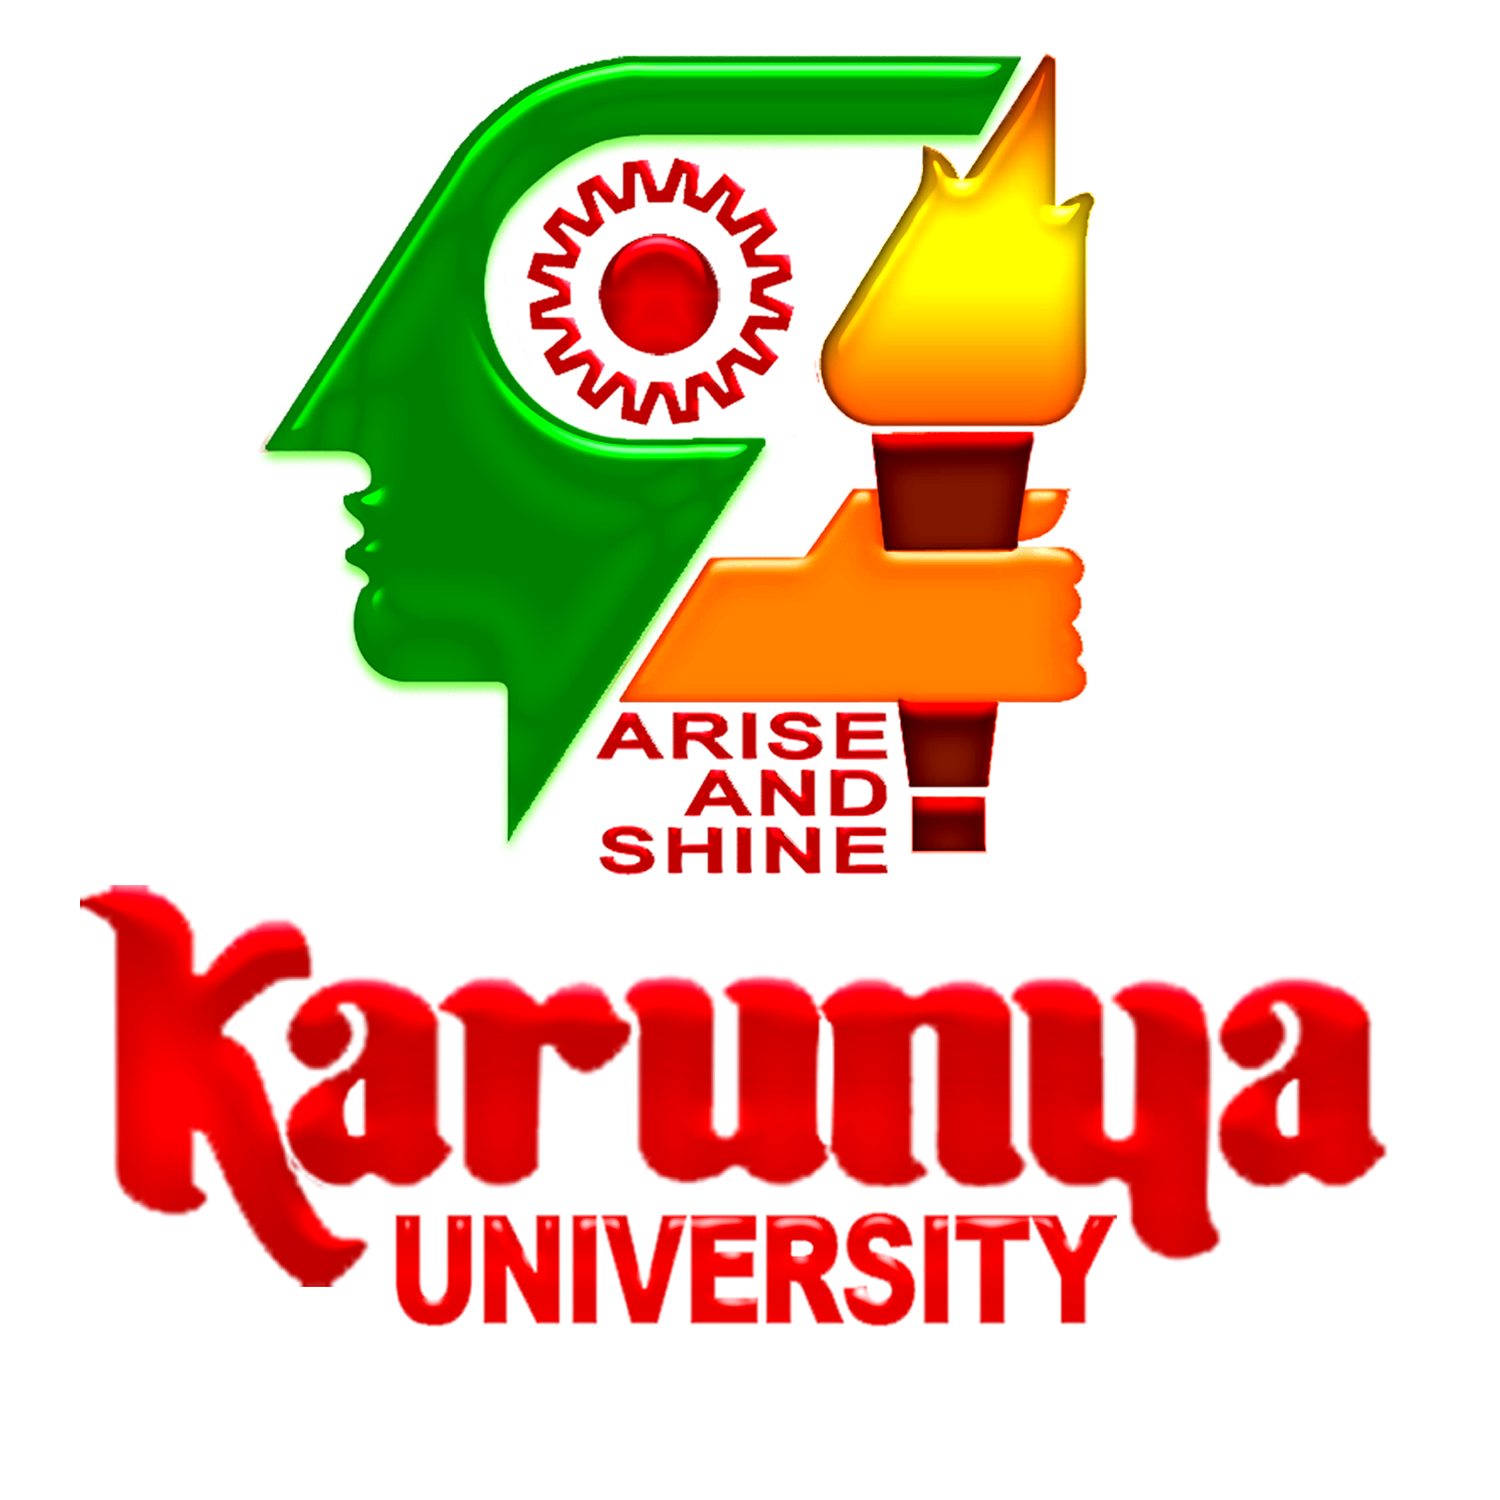 Karunya University and its focus on technical education